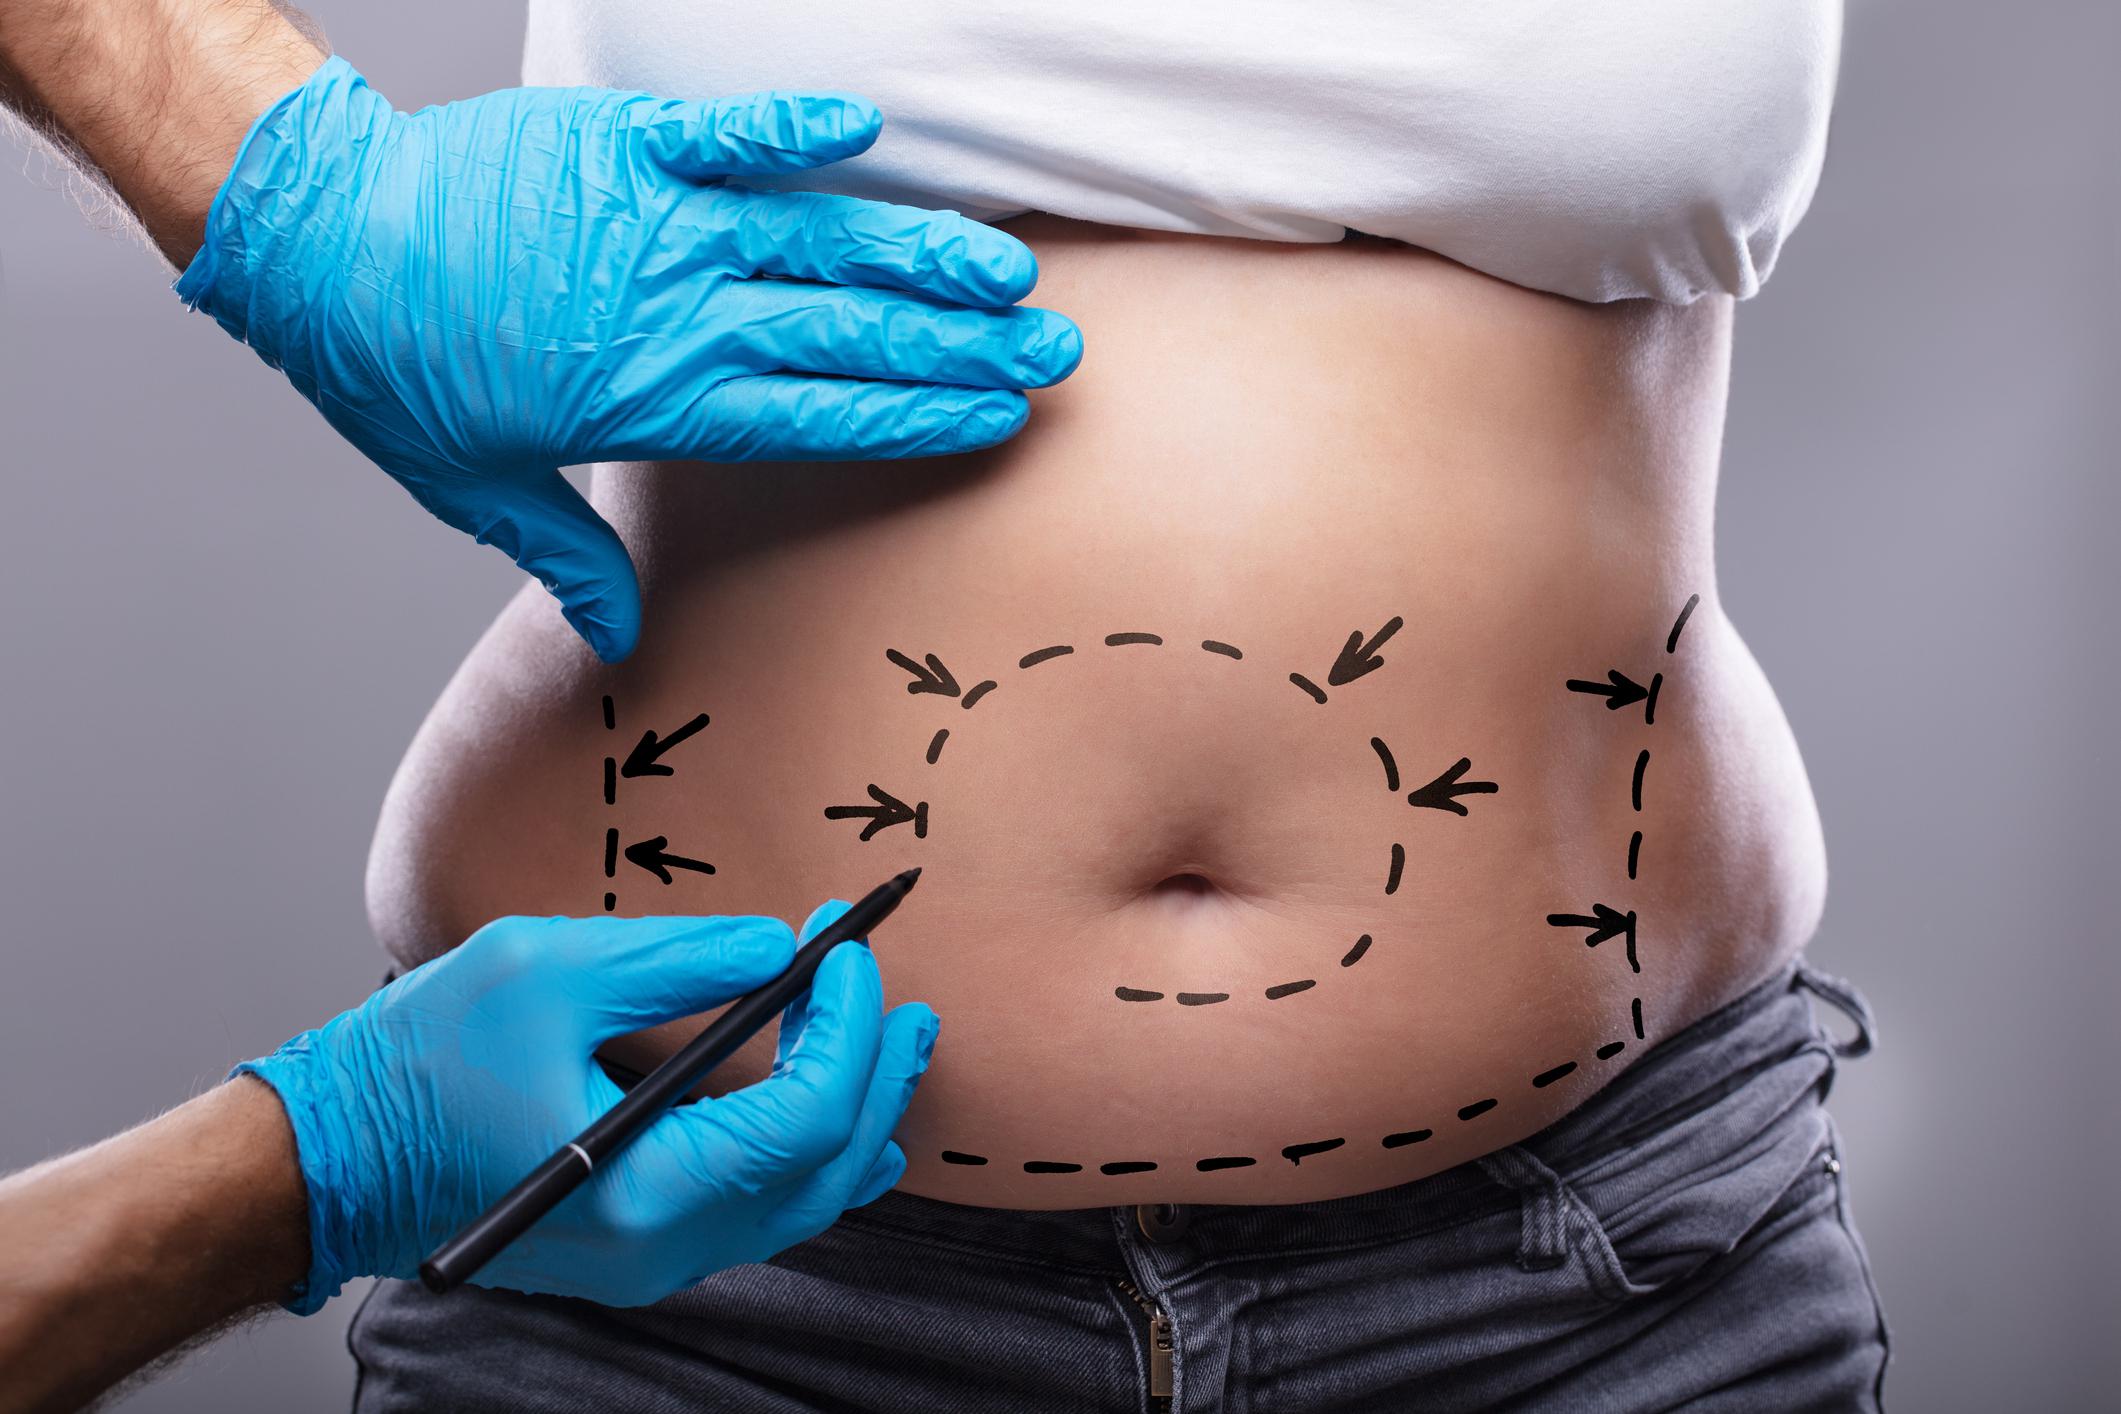 Thinking About Getting a Tummy Tuck? What to Know Before Going